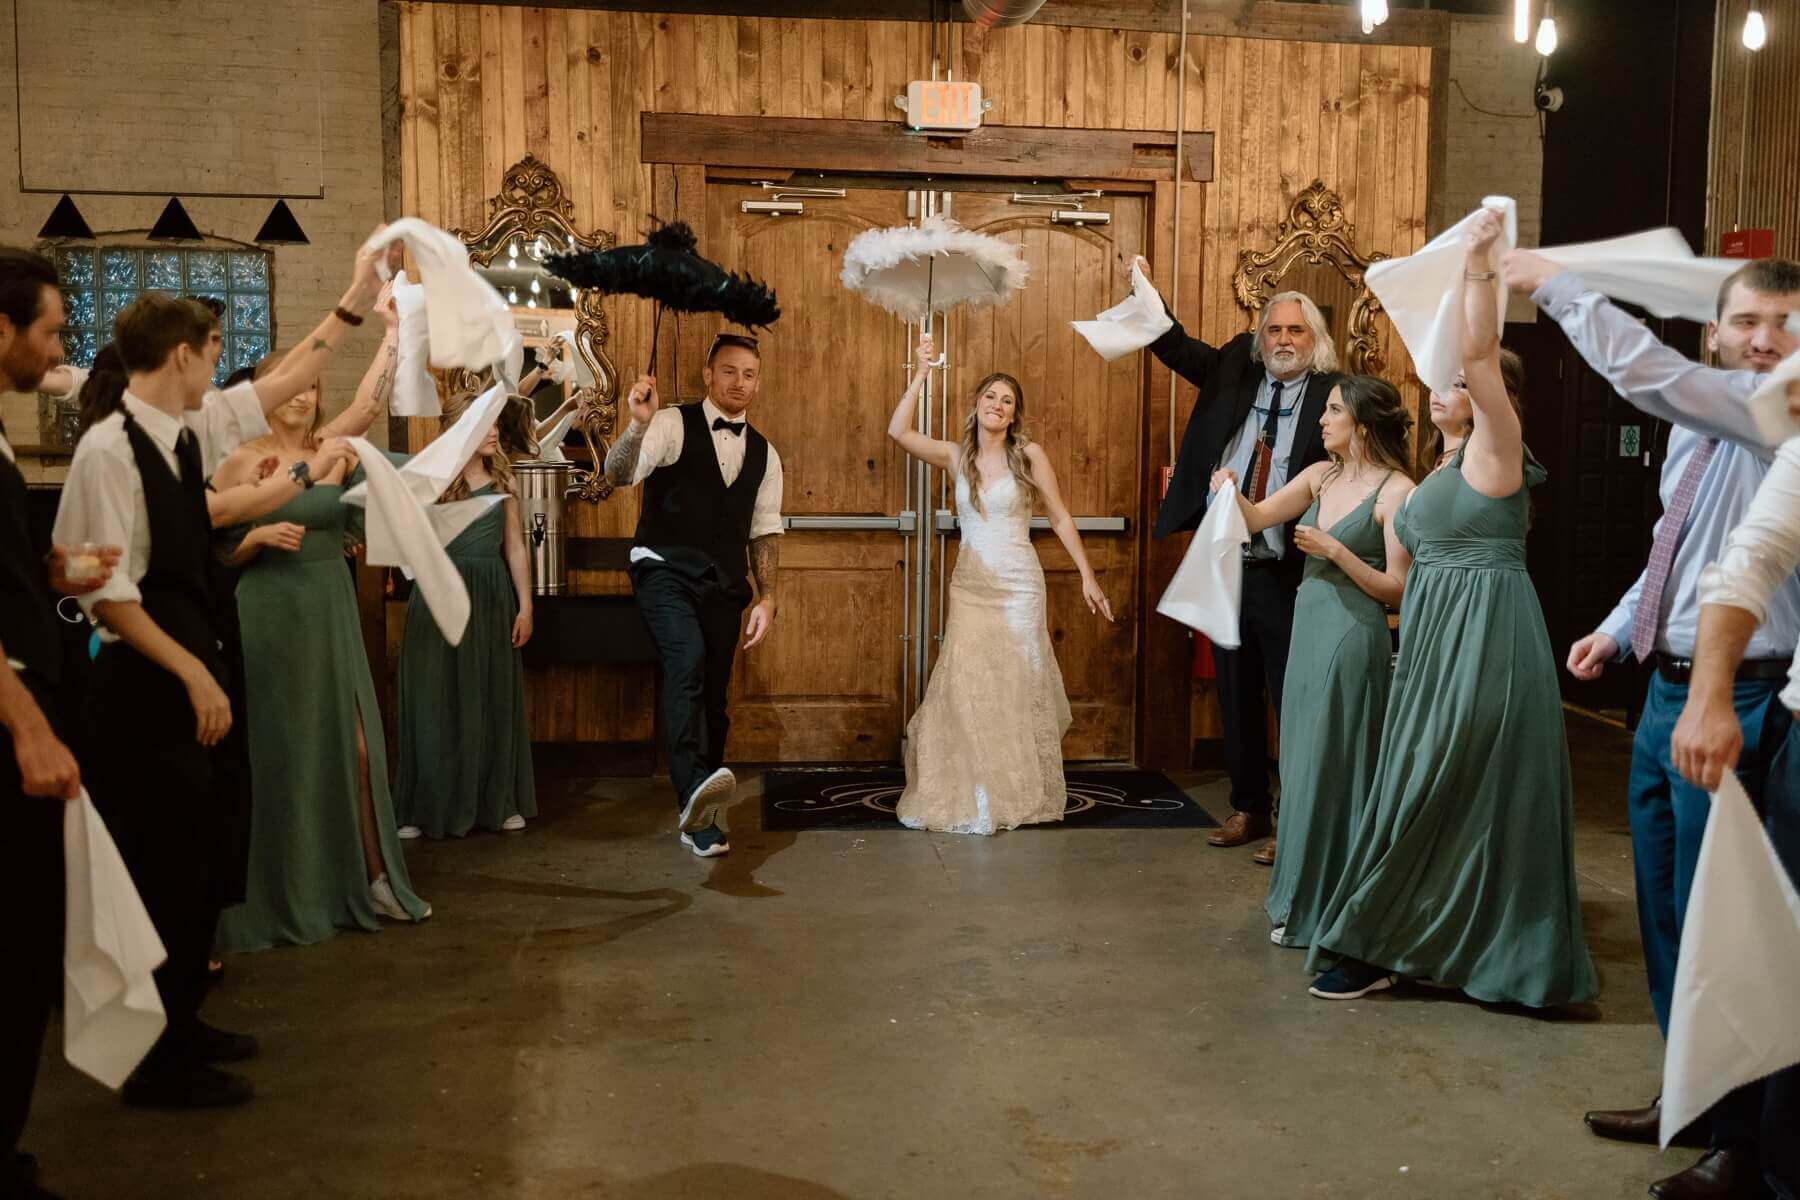 Bride and groom holding umbrellas while guests wave napkins during second line send-off